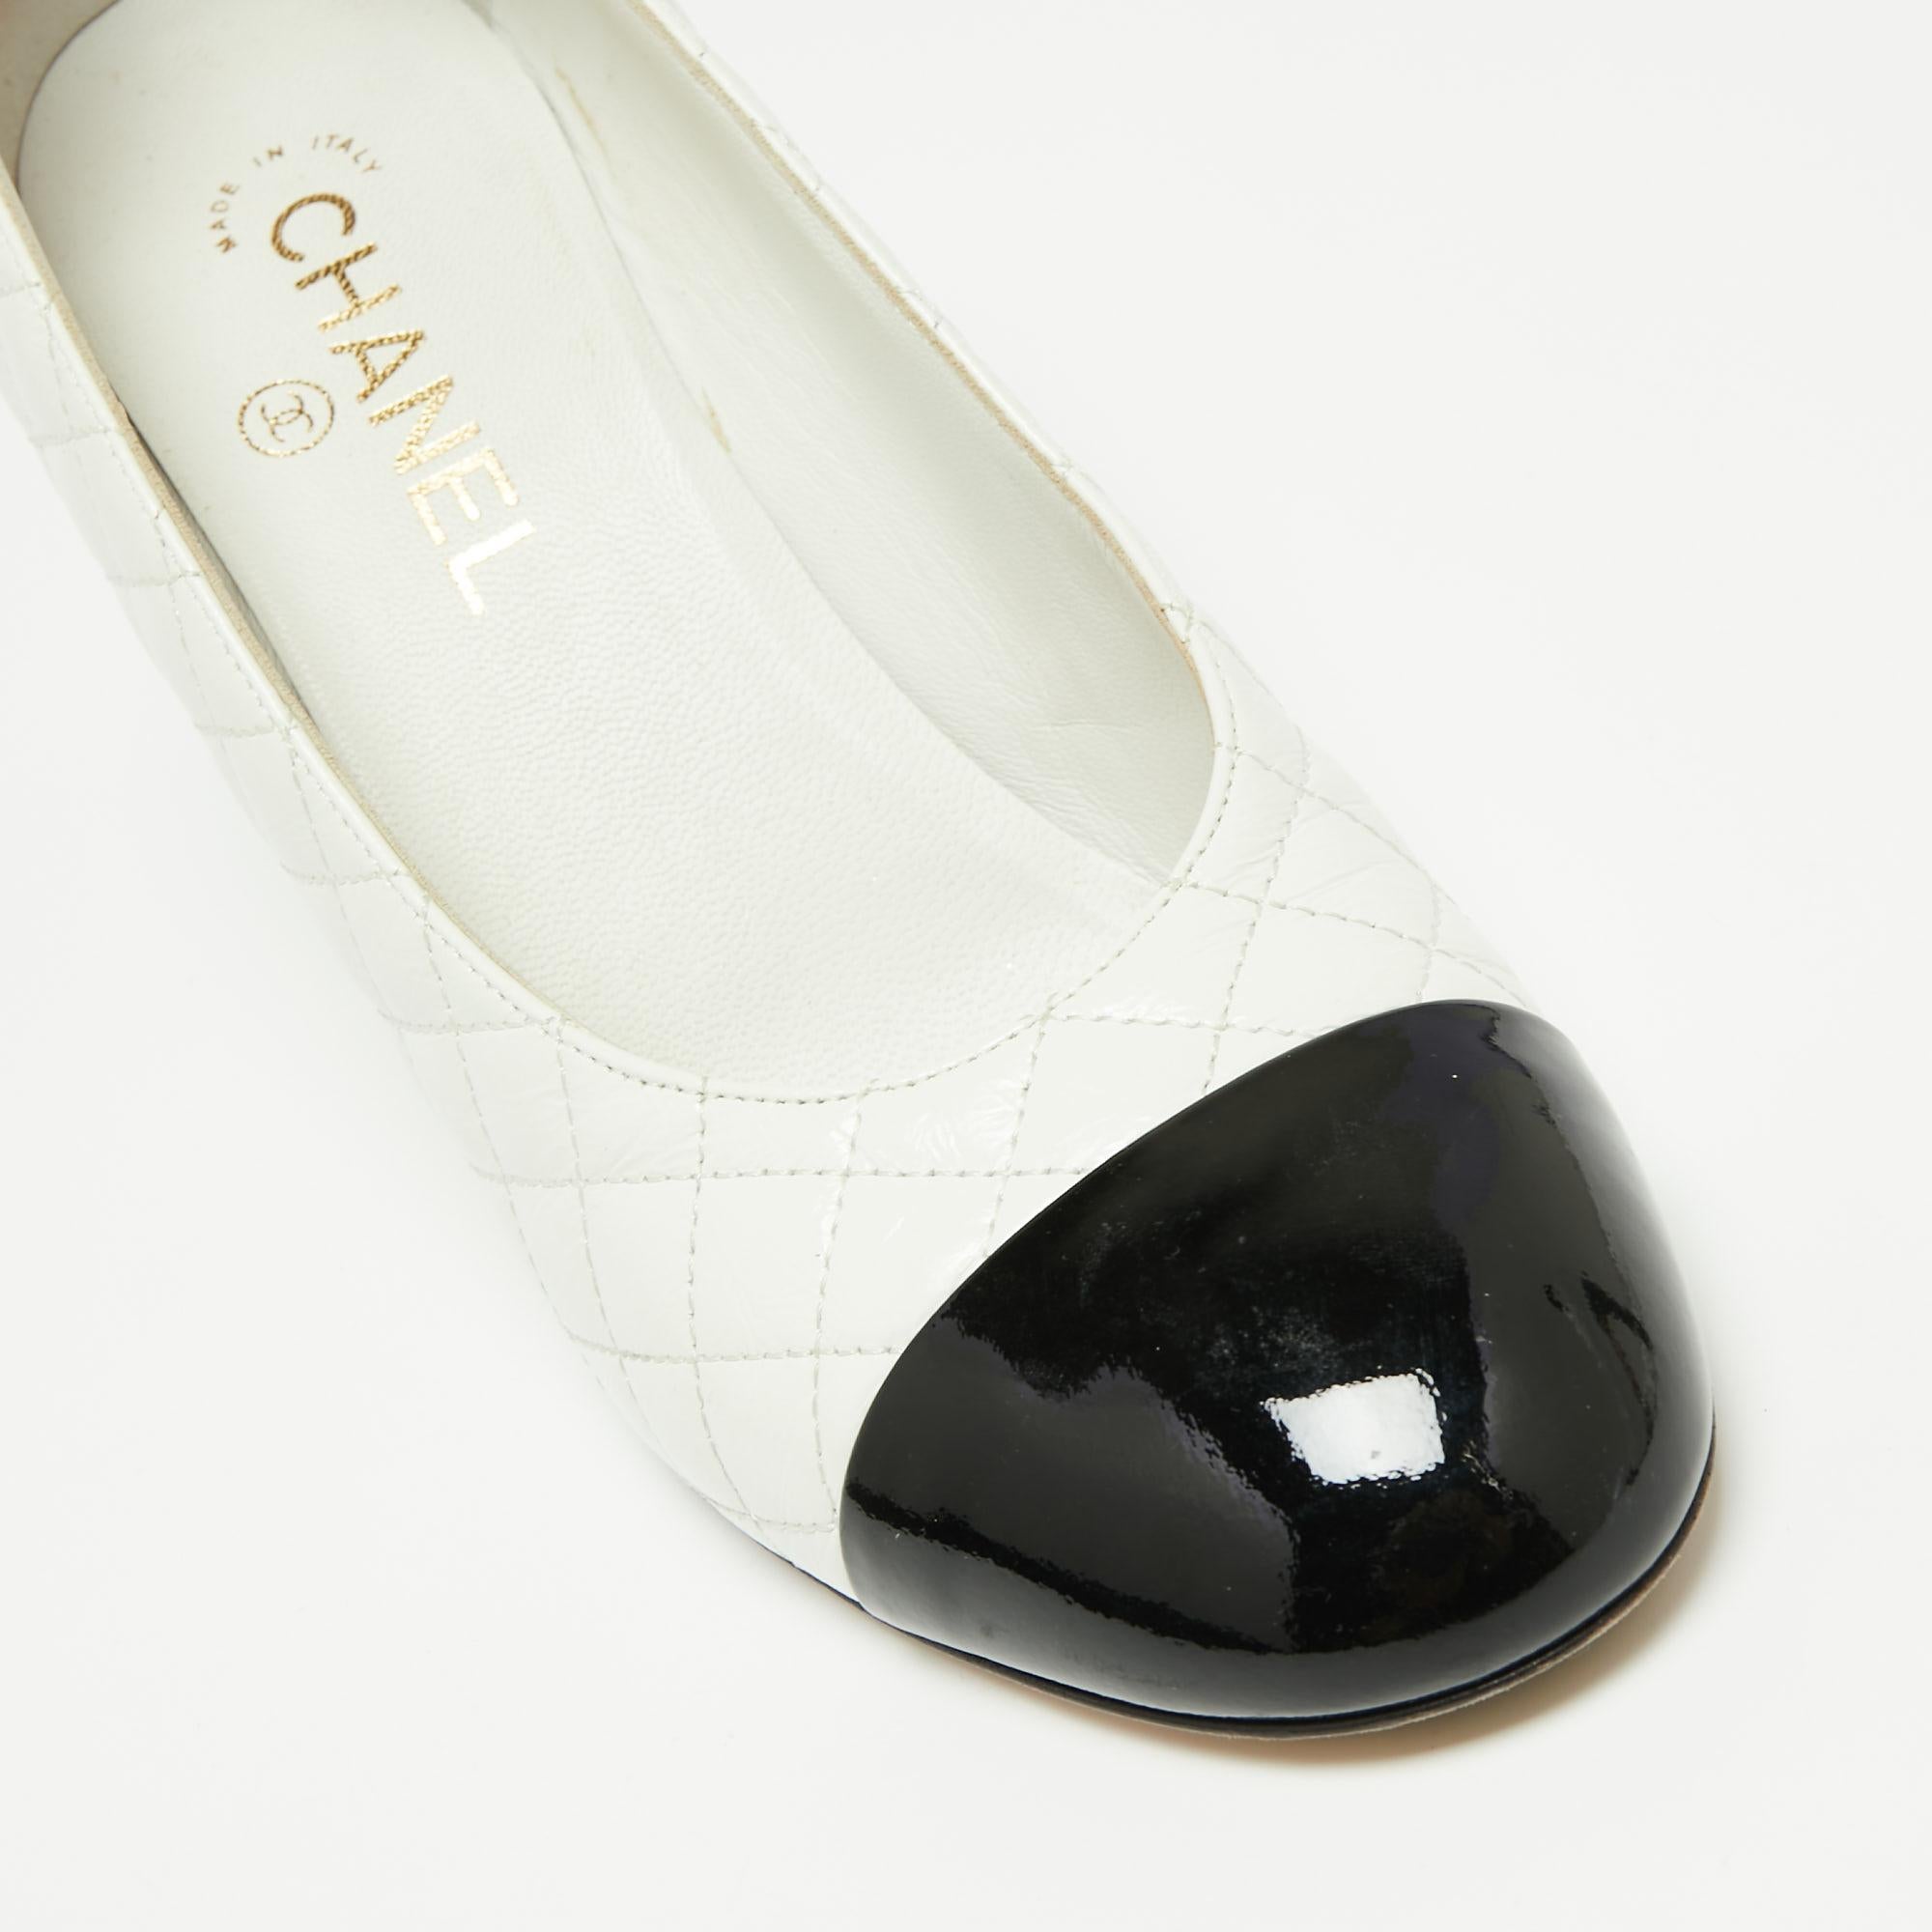 Chanel White/Black Quilted Leather and Patent Cap-Toe CC Pumps Size 40 1